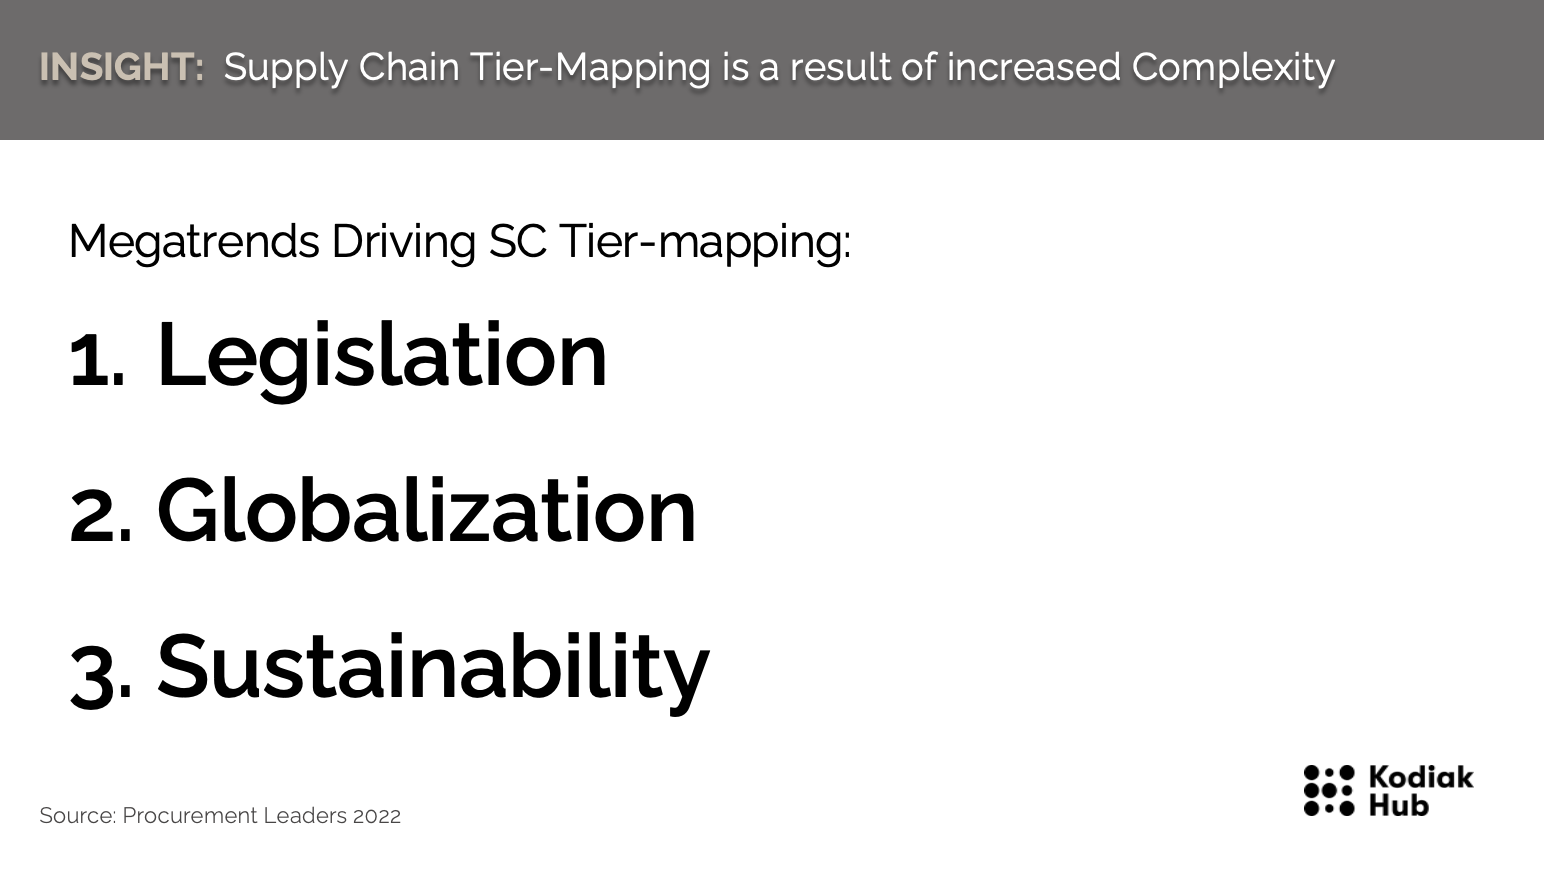 Procurement Trends 2022 in supply chain tier mapping